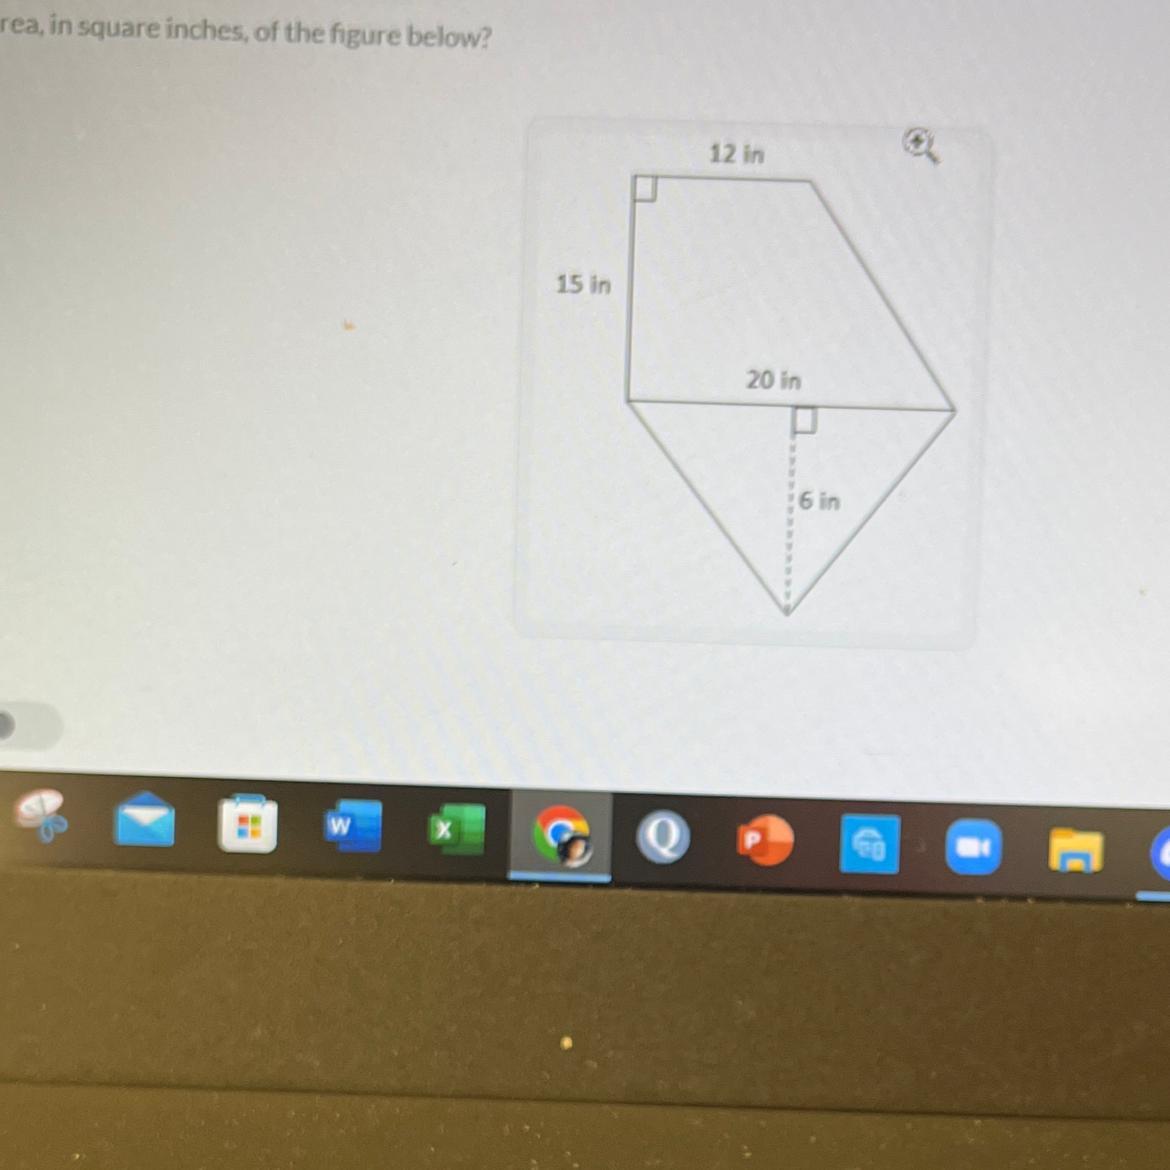 What Is The Total Area, In Square Inches, Of The Figure Below?